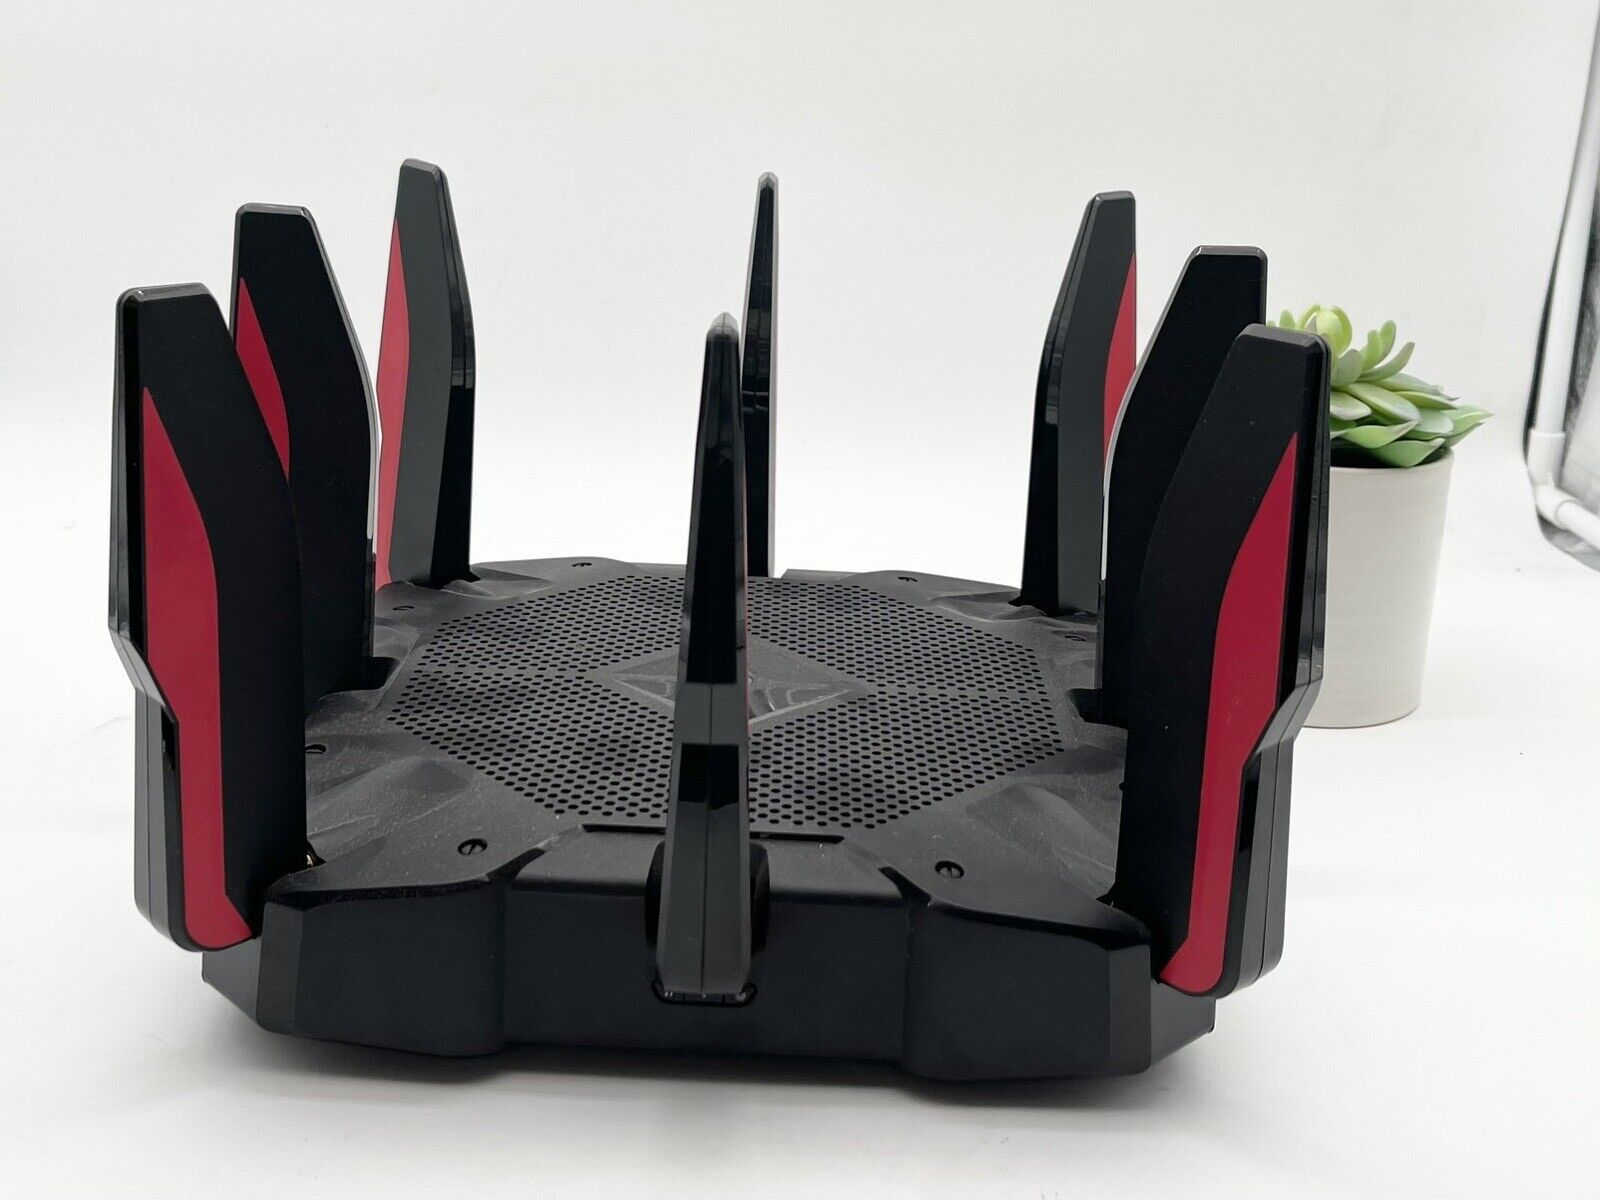 TP-LINK Archer AX11000 Tri-Band Wi-Fi 6 Gaming Router - Black/Red, no AC adapter